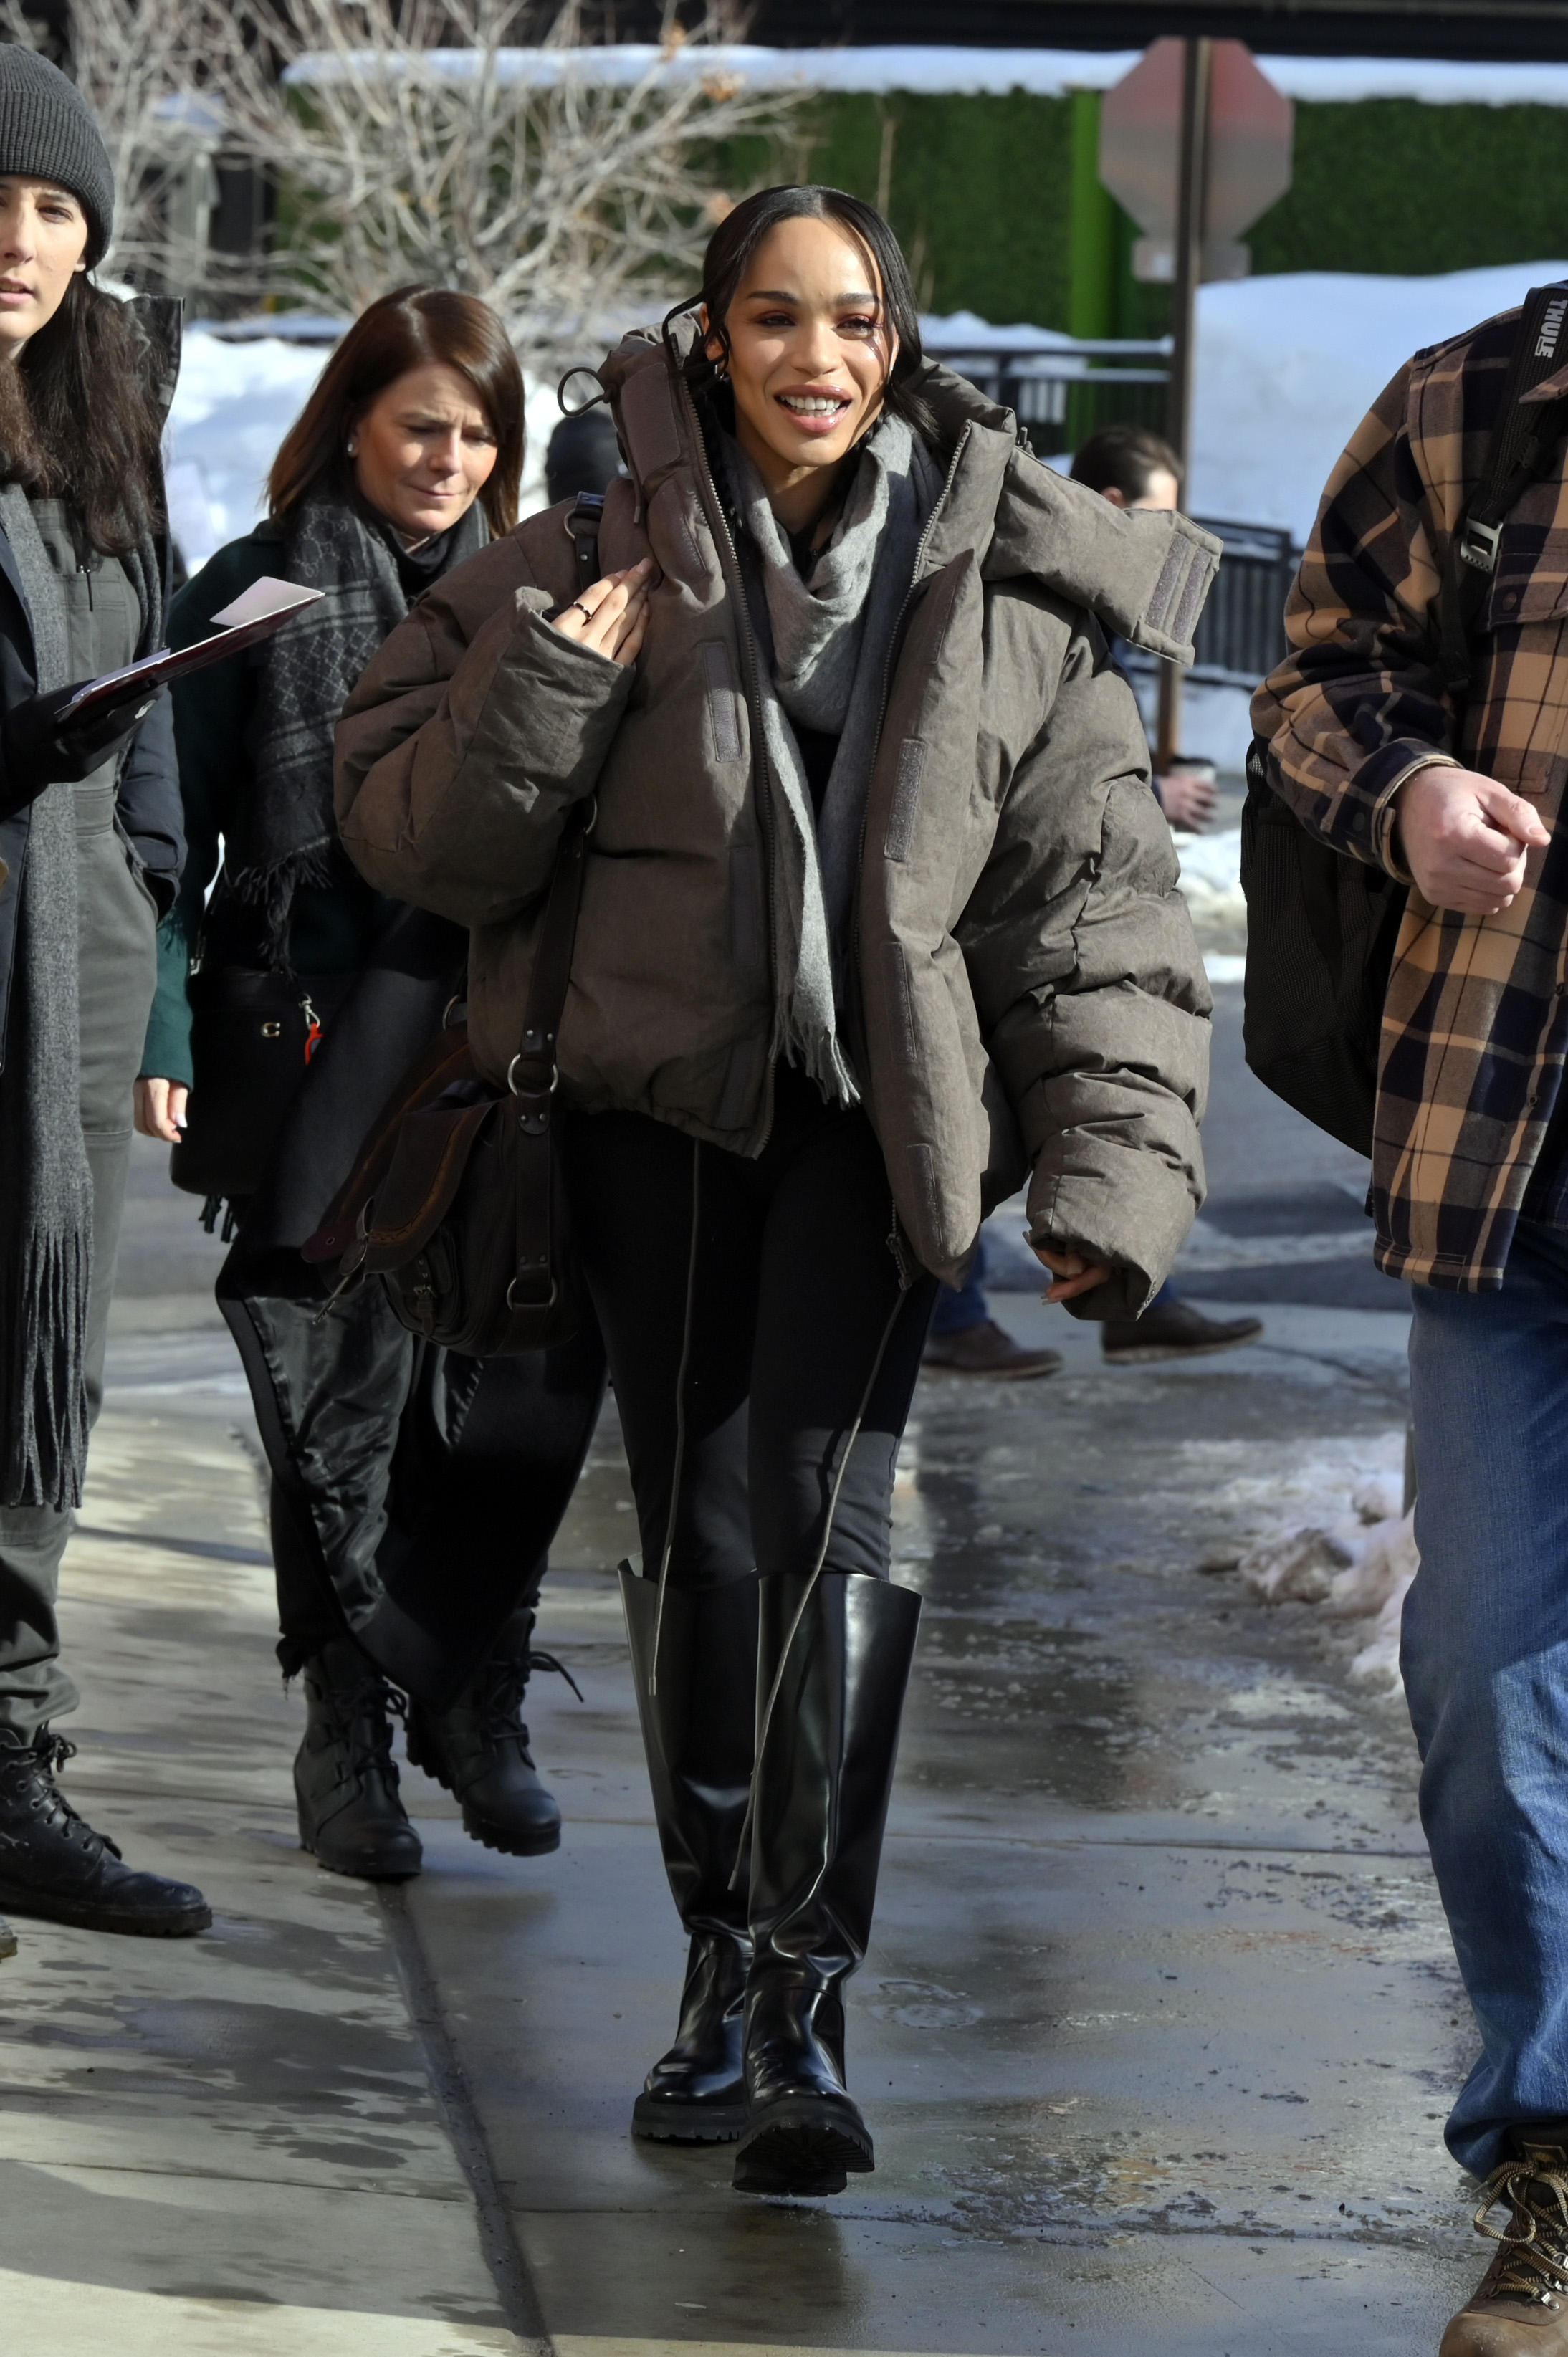 Cleopatra Coleman walks along Main Street during the 2023 Sundance Film Festival on January 20, 2023, in Park City, Utah. | Source: Getty Images